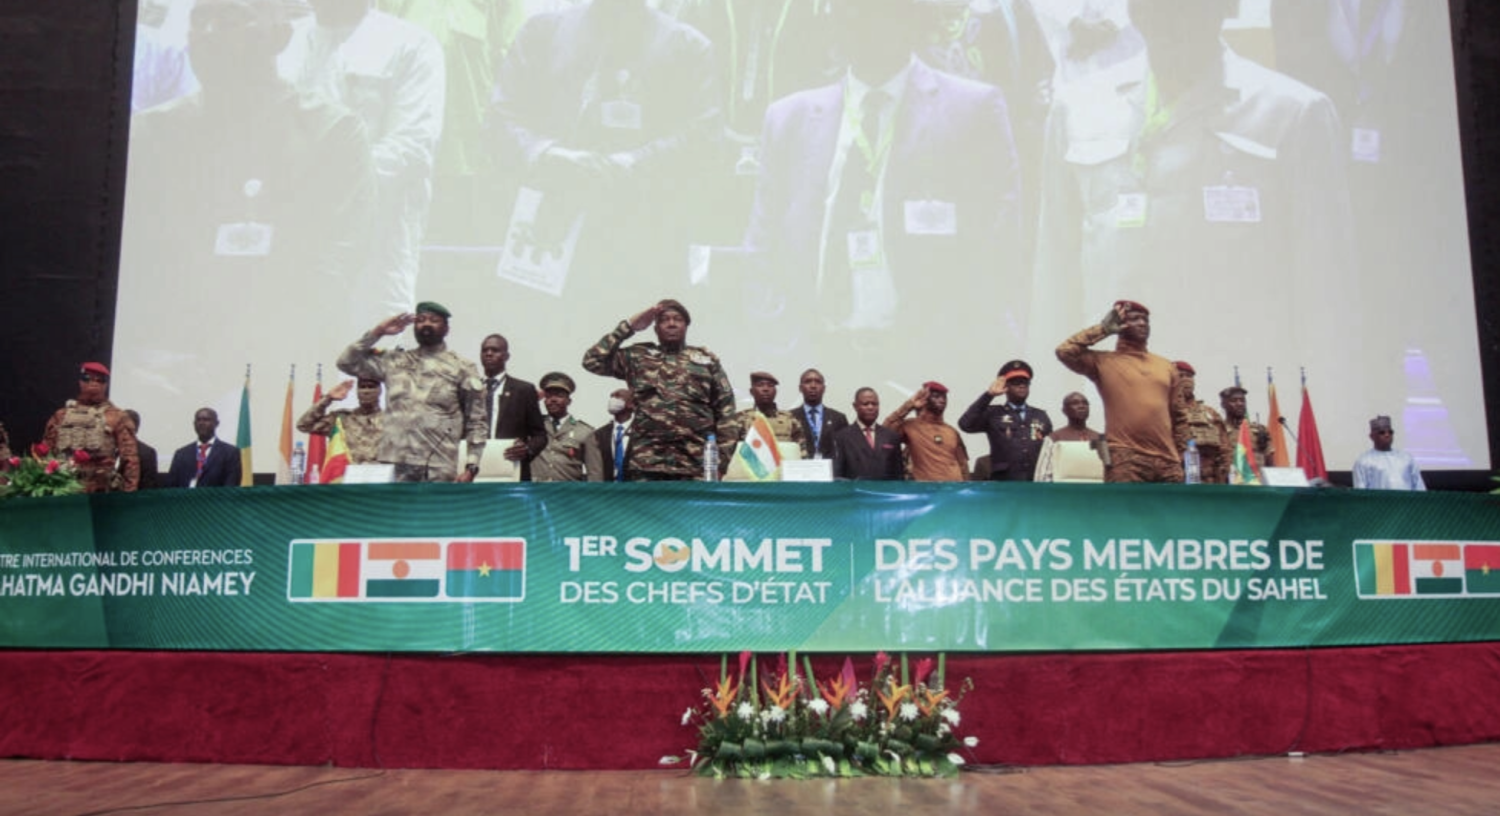 Mali, Niger, Burkina Faso: How a triumvirate of military leaders are redrawing West Africa’s map